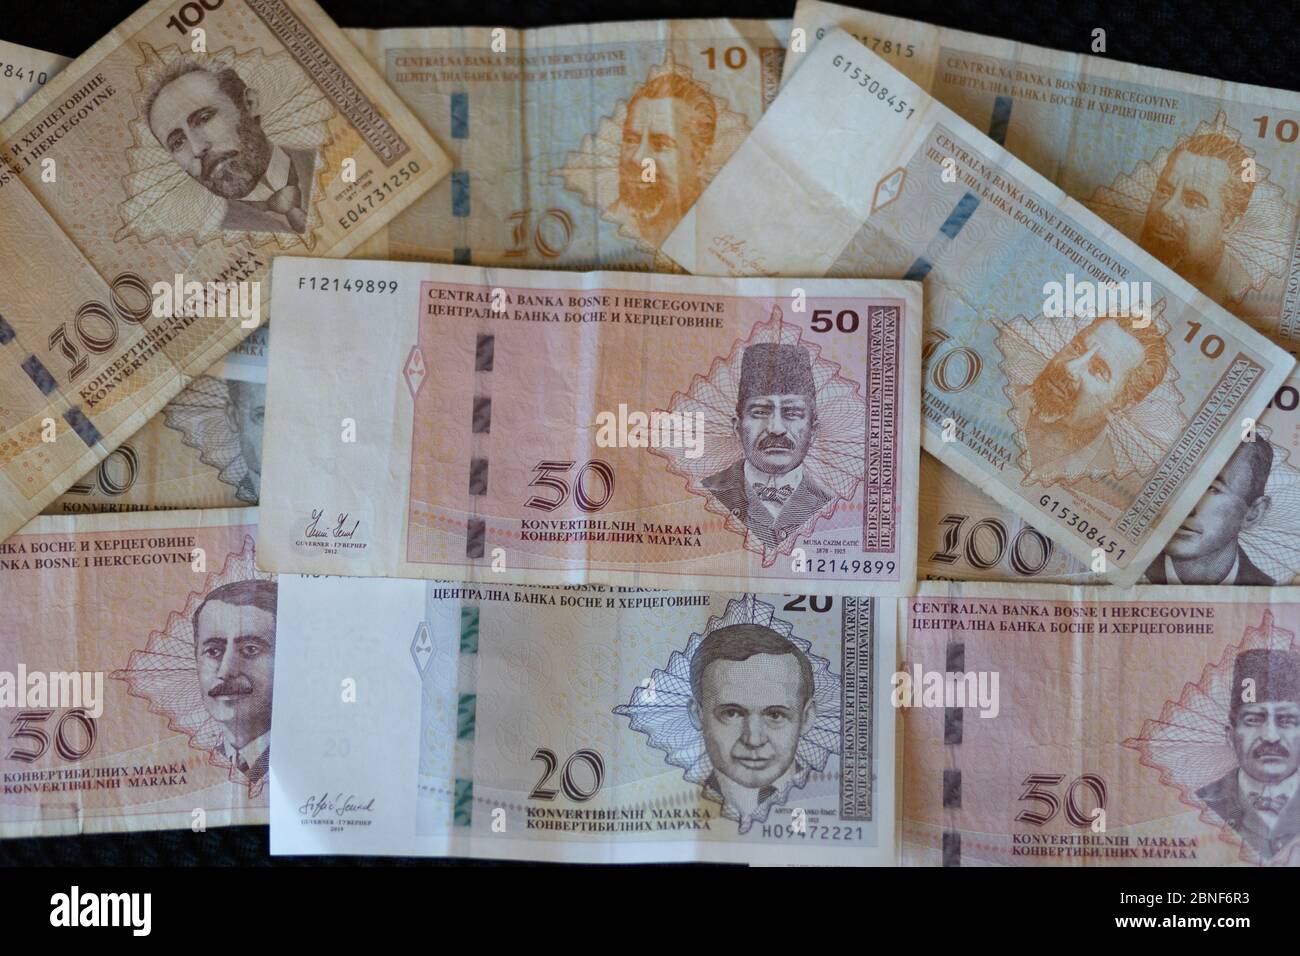 Closeup shot of the banknotes of Bosnia and Herzegovina currency spread on the surface Stock Photo